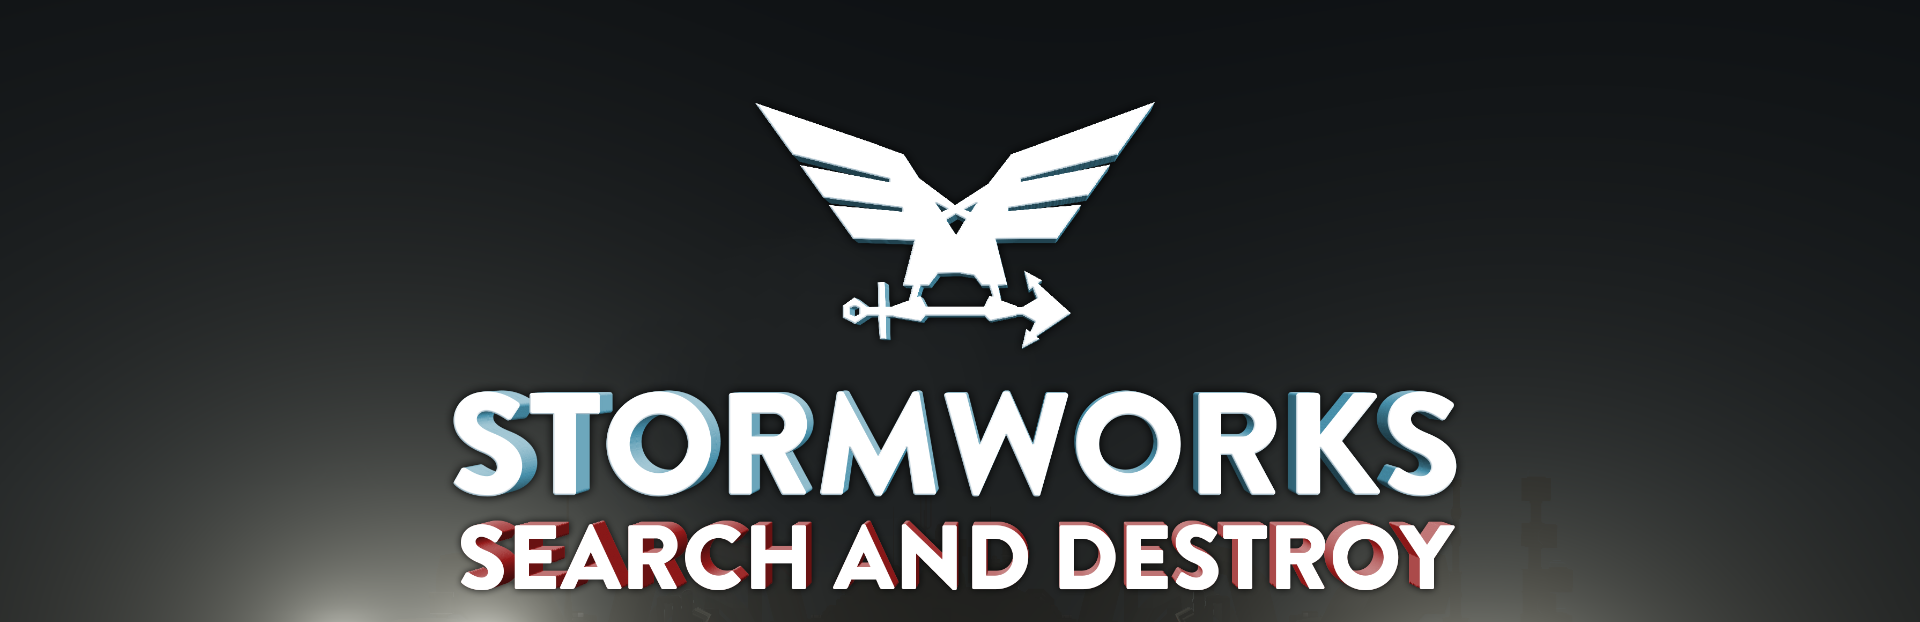 steam stormworks search and destroy